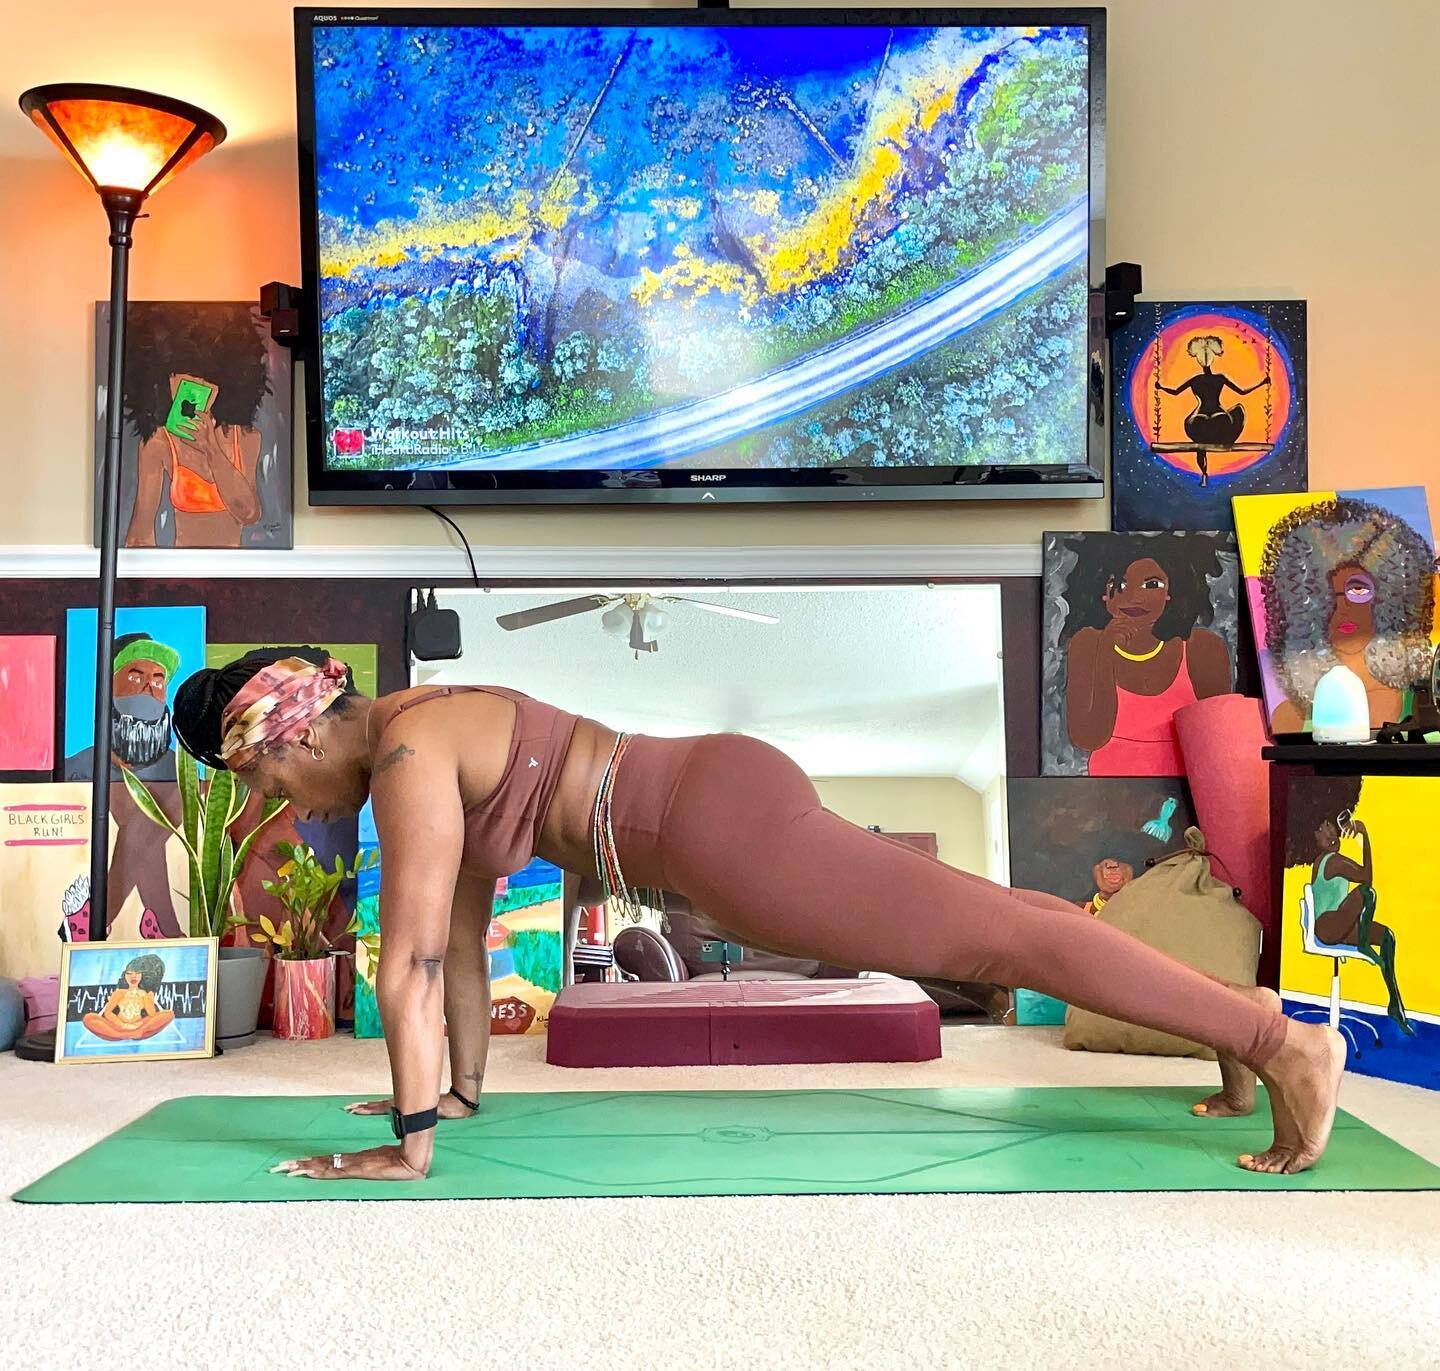 There is someone, somewhere waiting for you to motivate them to be great. So go and be great; inspire! 

Day 18 - #dorkchallenge with @ladydork #plankpose

#yogalovers #yogaworld #blackgirlyoga #dorkflow #yogaeverydamnday #yogainspiration #yogi #blac